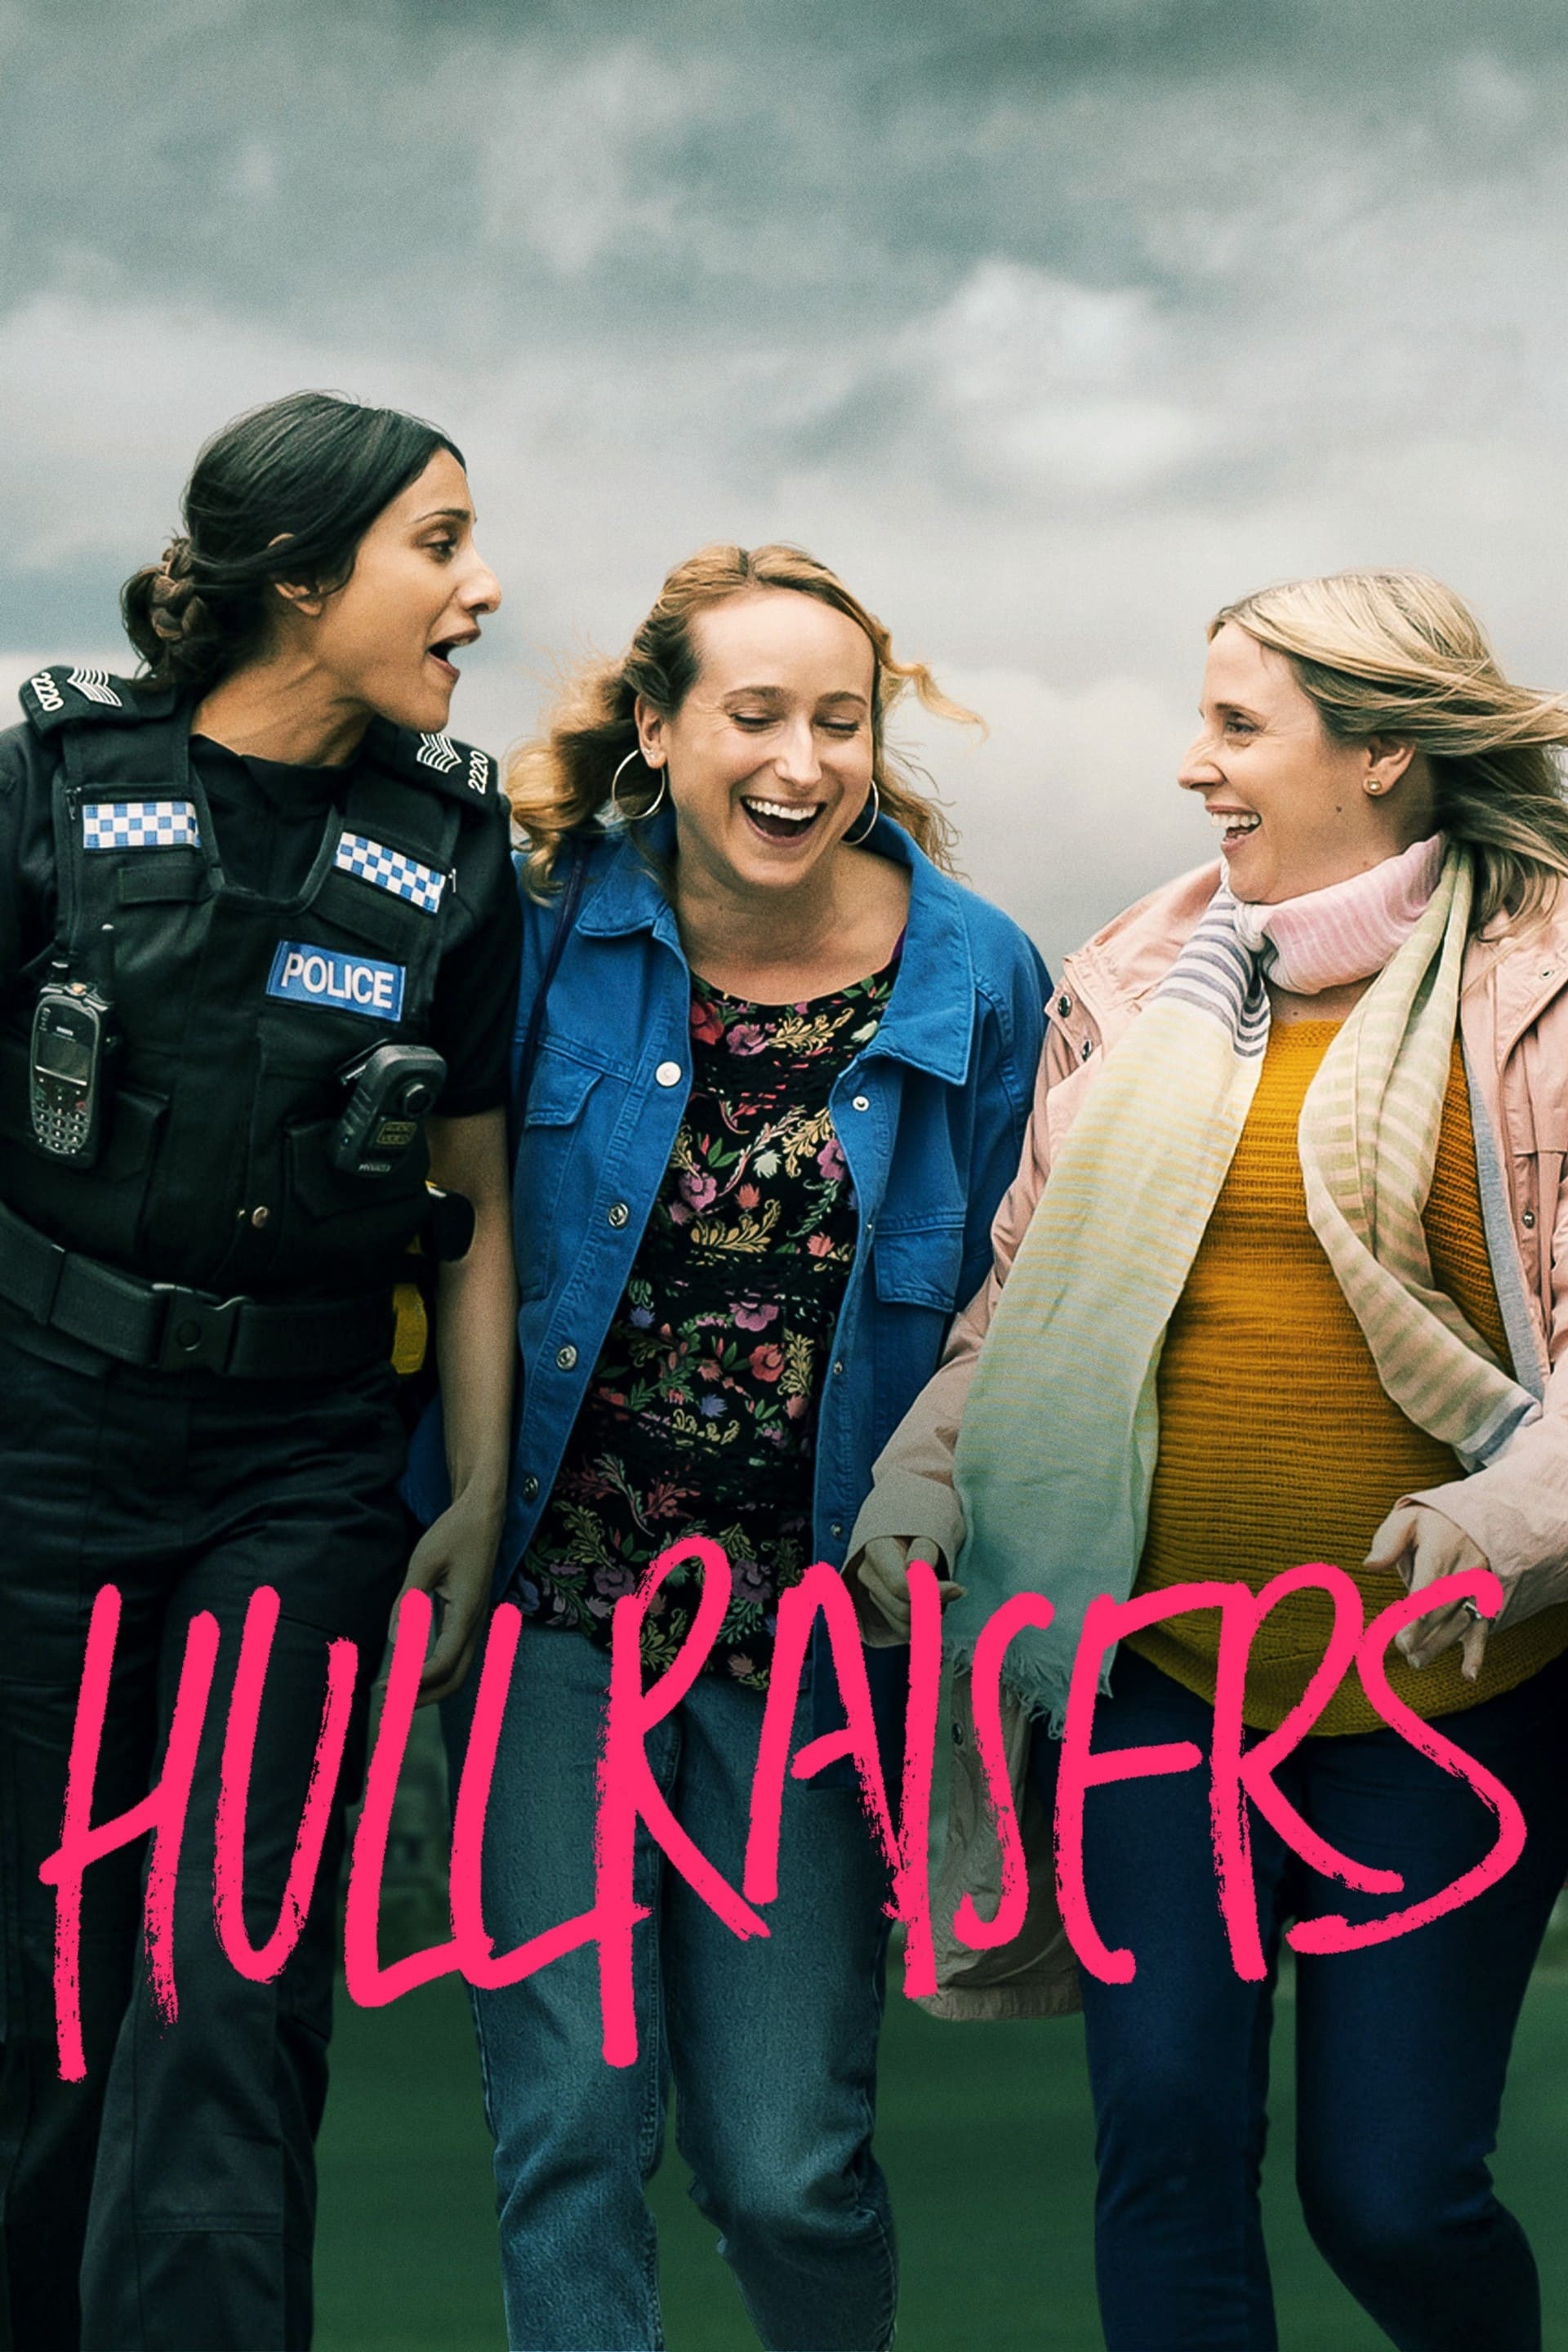 Hullraisers TV Shows About Working Class